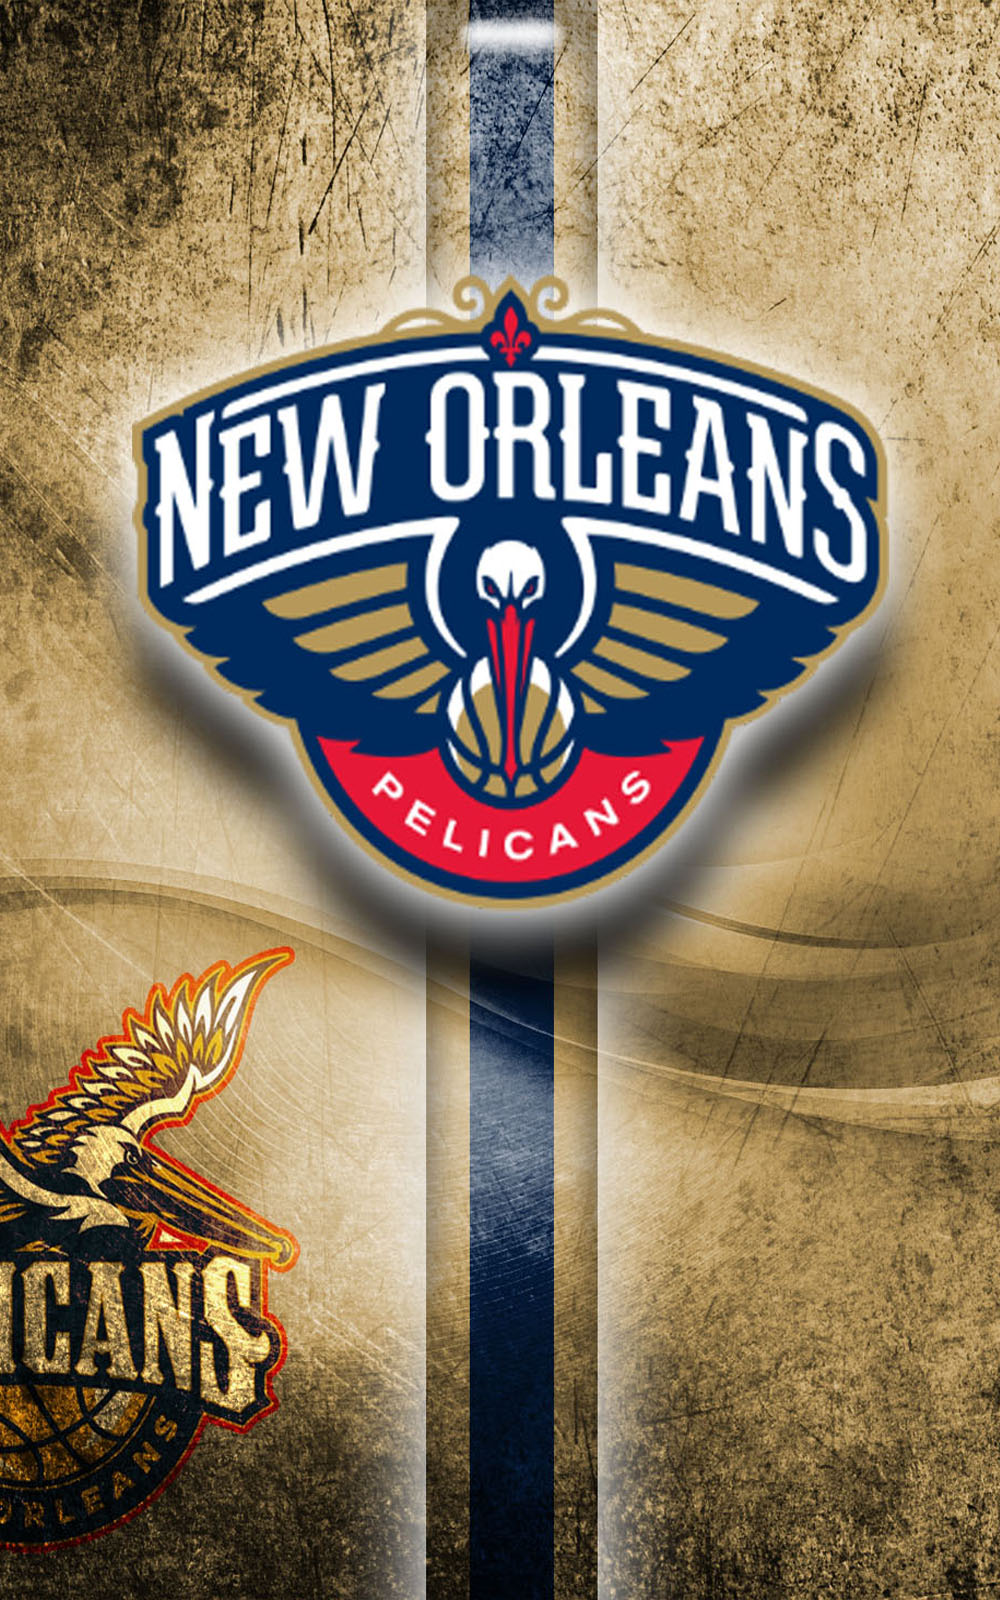 New Orleans Pelicans - Download Free HD Mobile Wallpapers